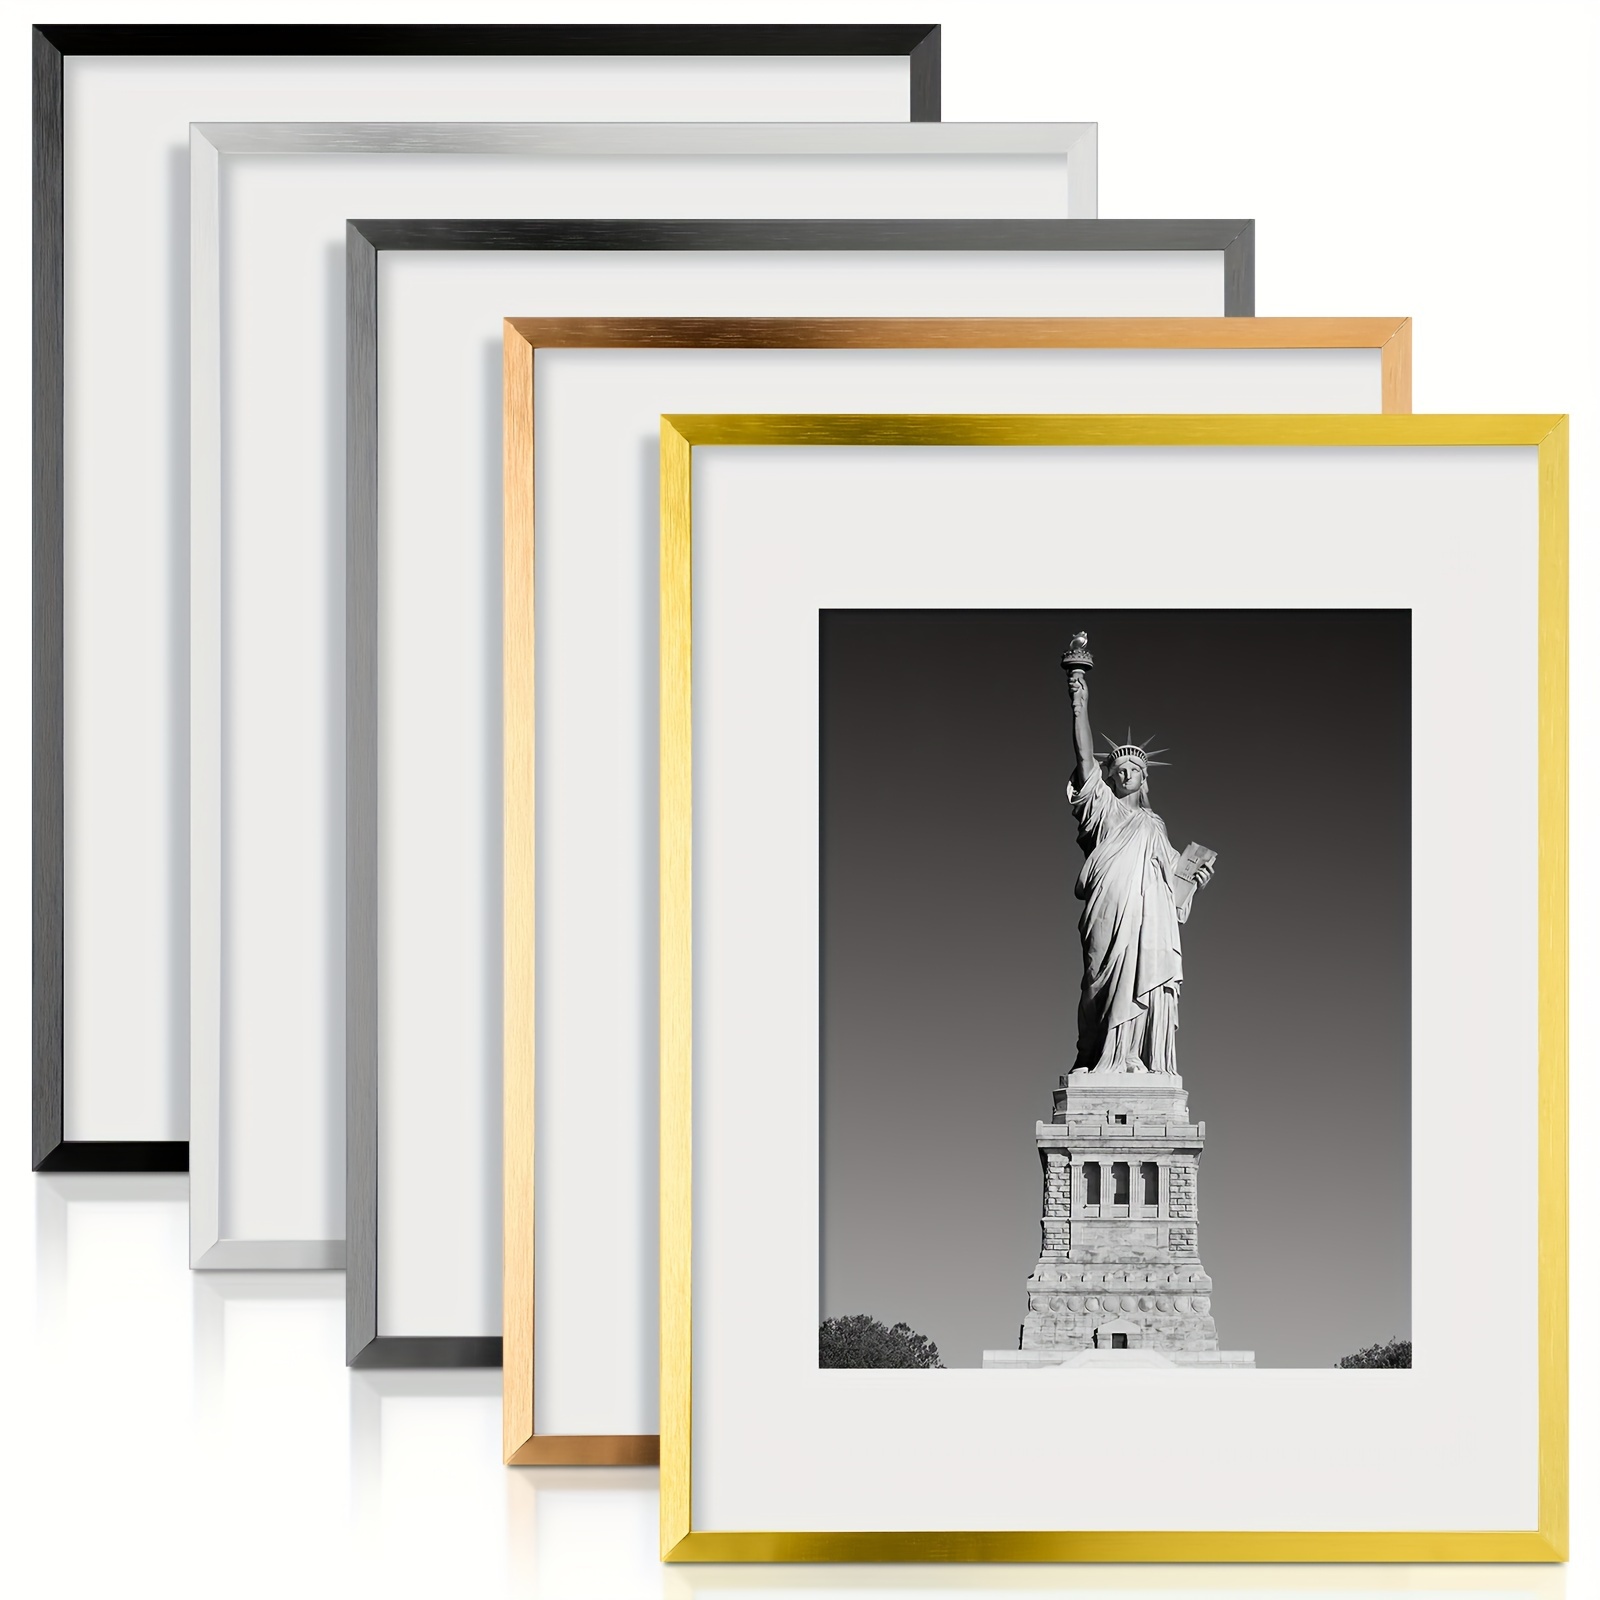 

Picture Frames Set Of 5 Aluminum Picture Frame Wall Mounting Gallery Picture Frames Photo Frames For Wall Display Suitable For Matted Or Without Mat